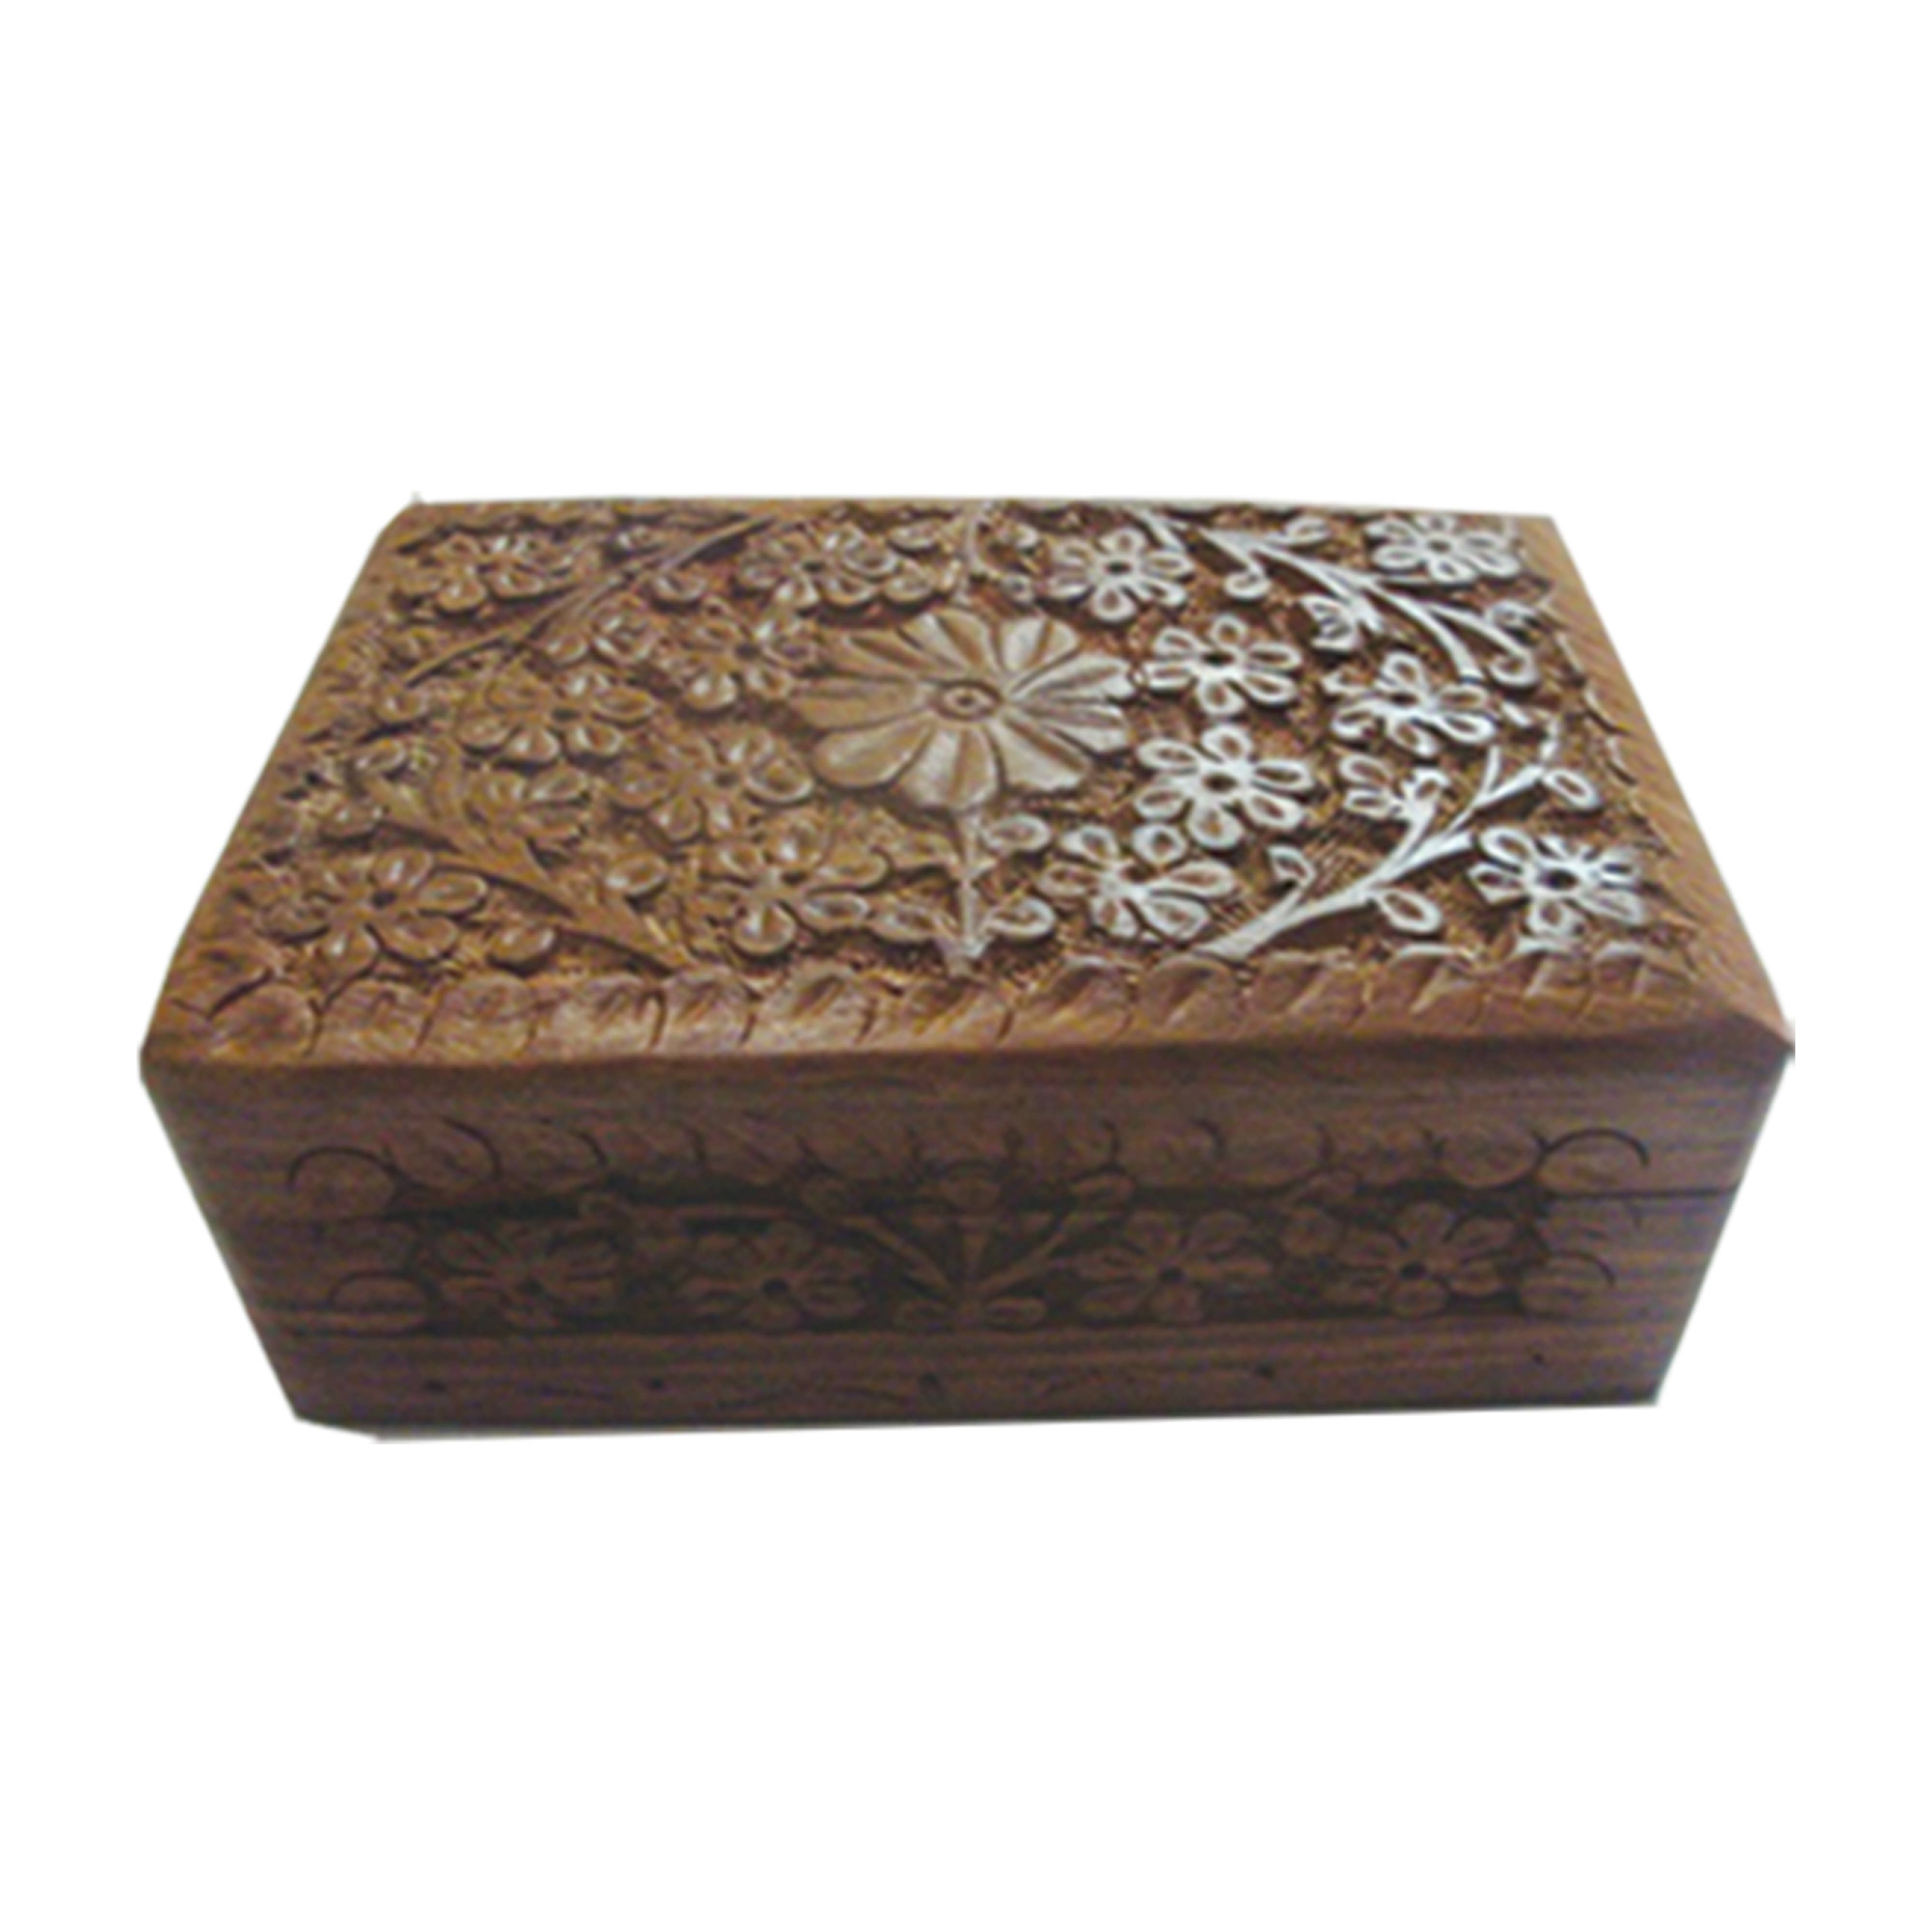 Purchase Wholesale wooden box. Free Returns & Net 60 Terms on Faire